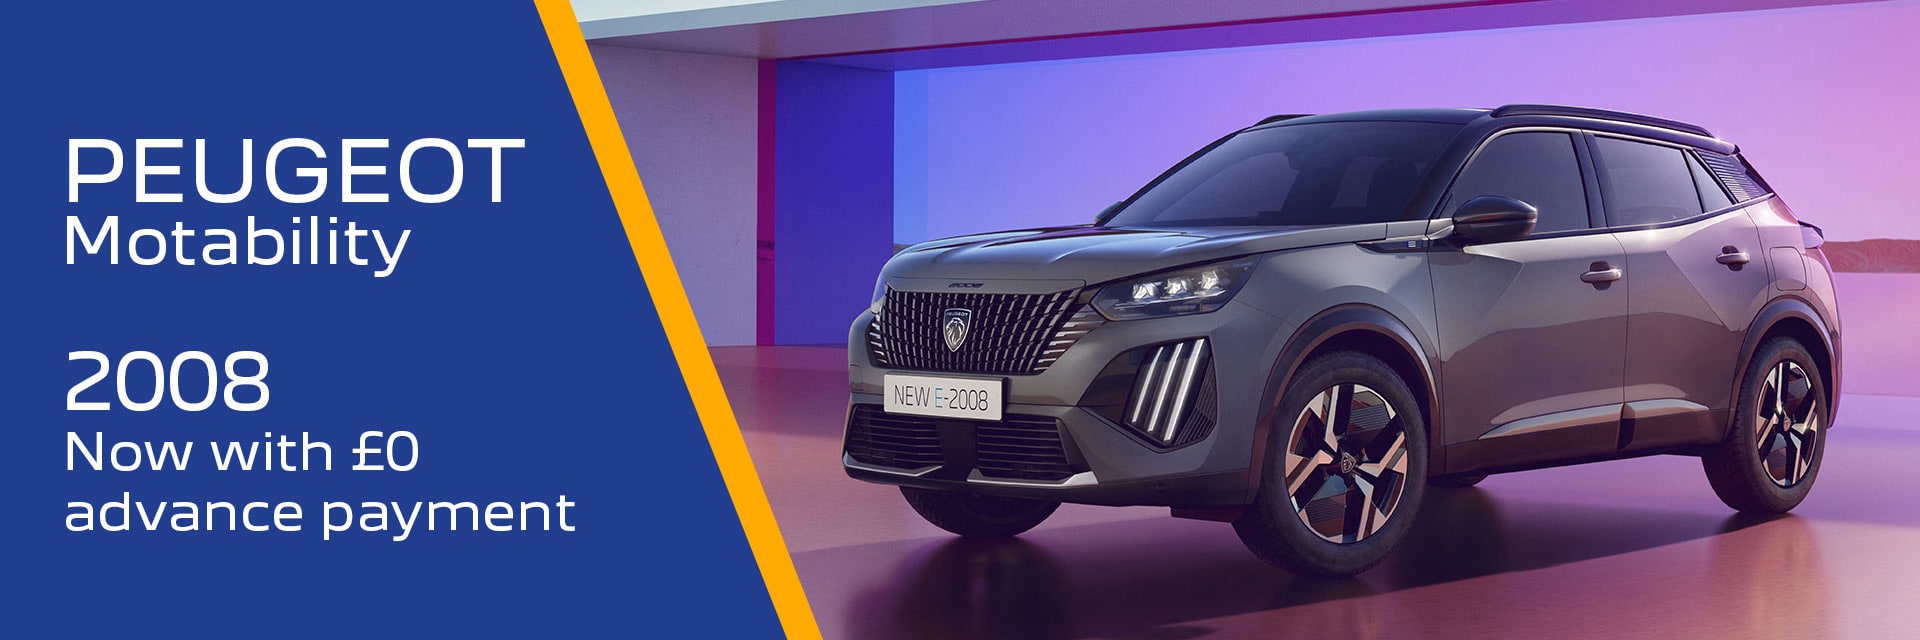 Peugeot 2008 now with £0 advance payment on Motability